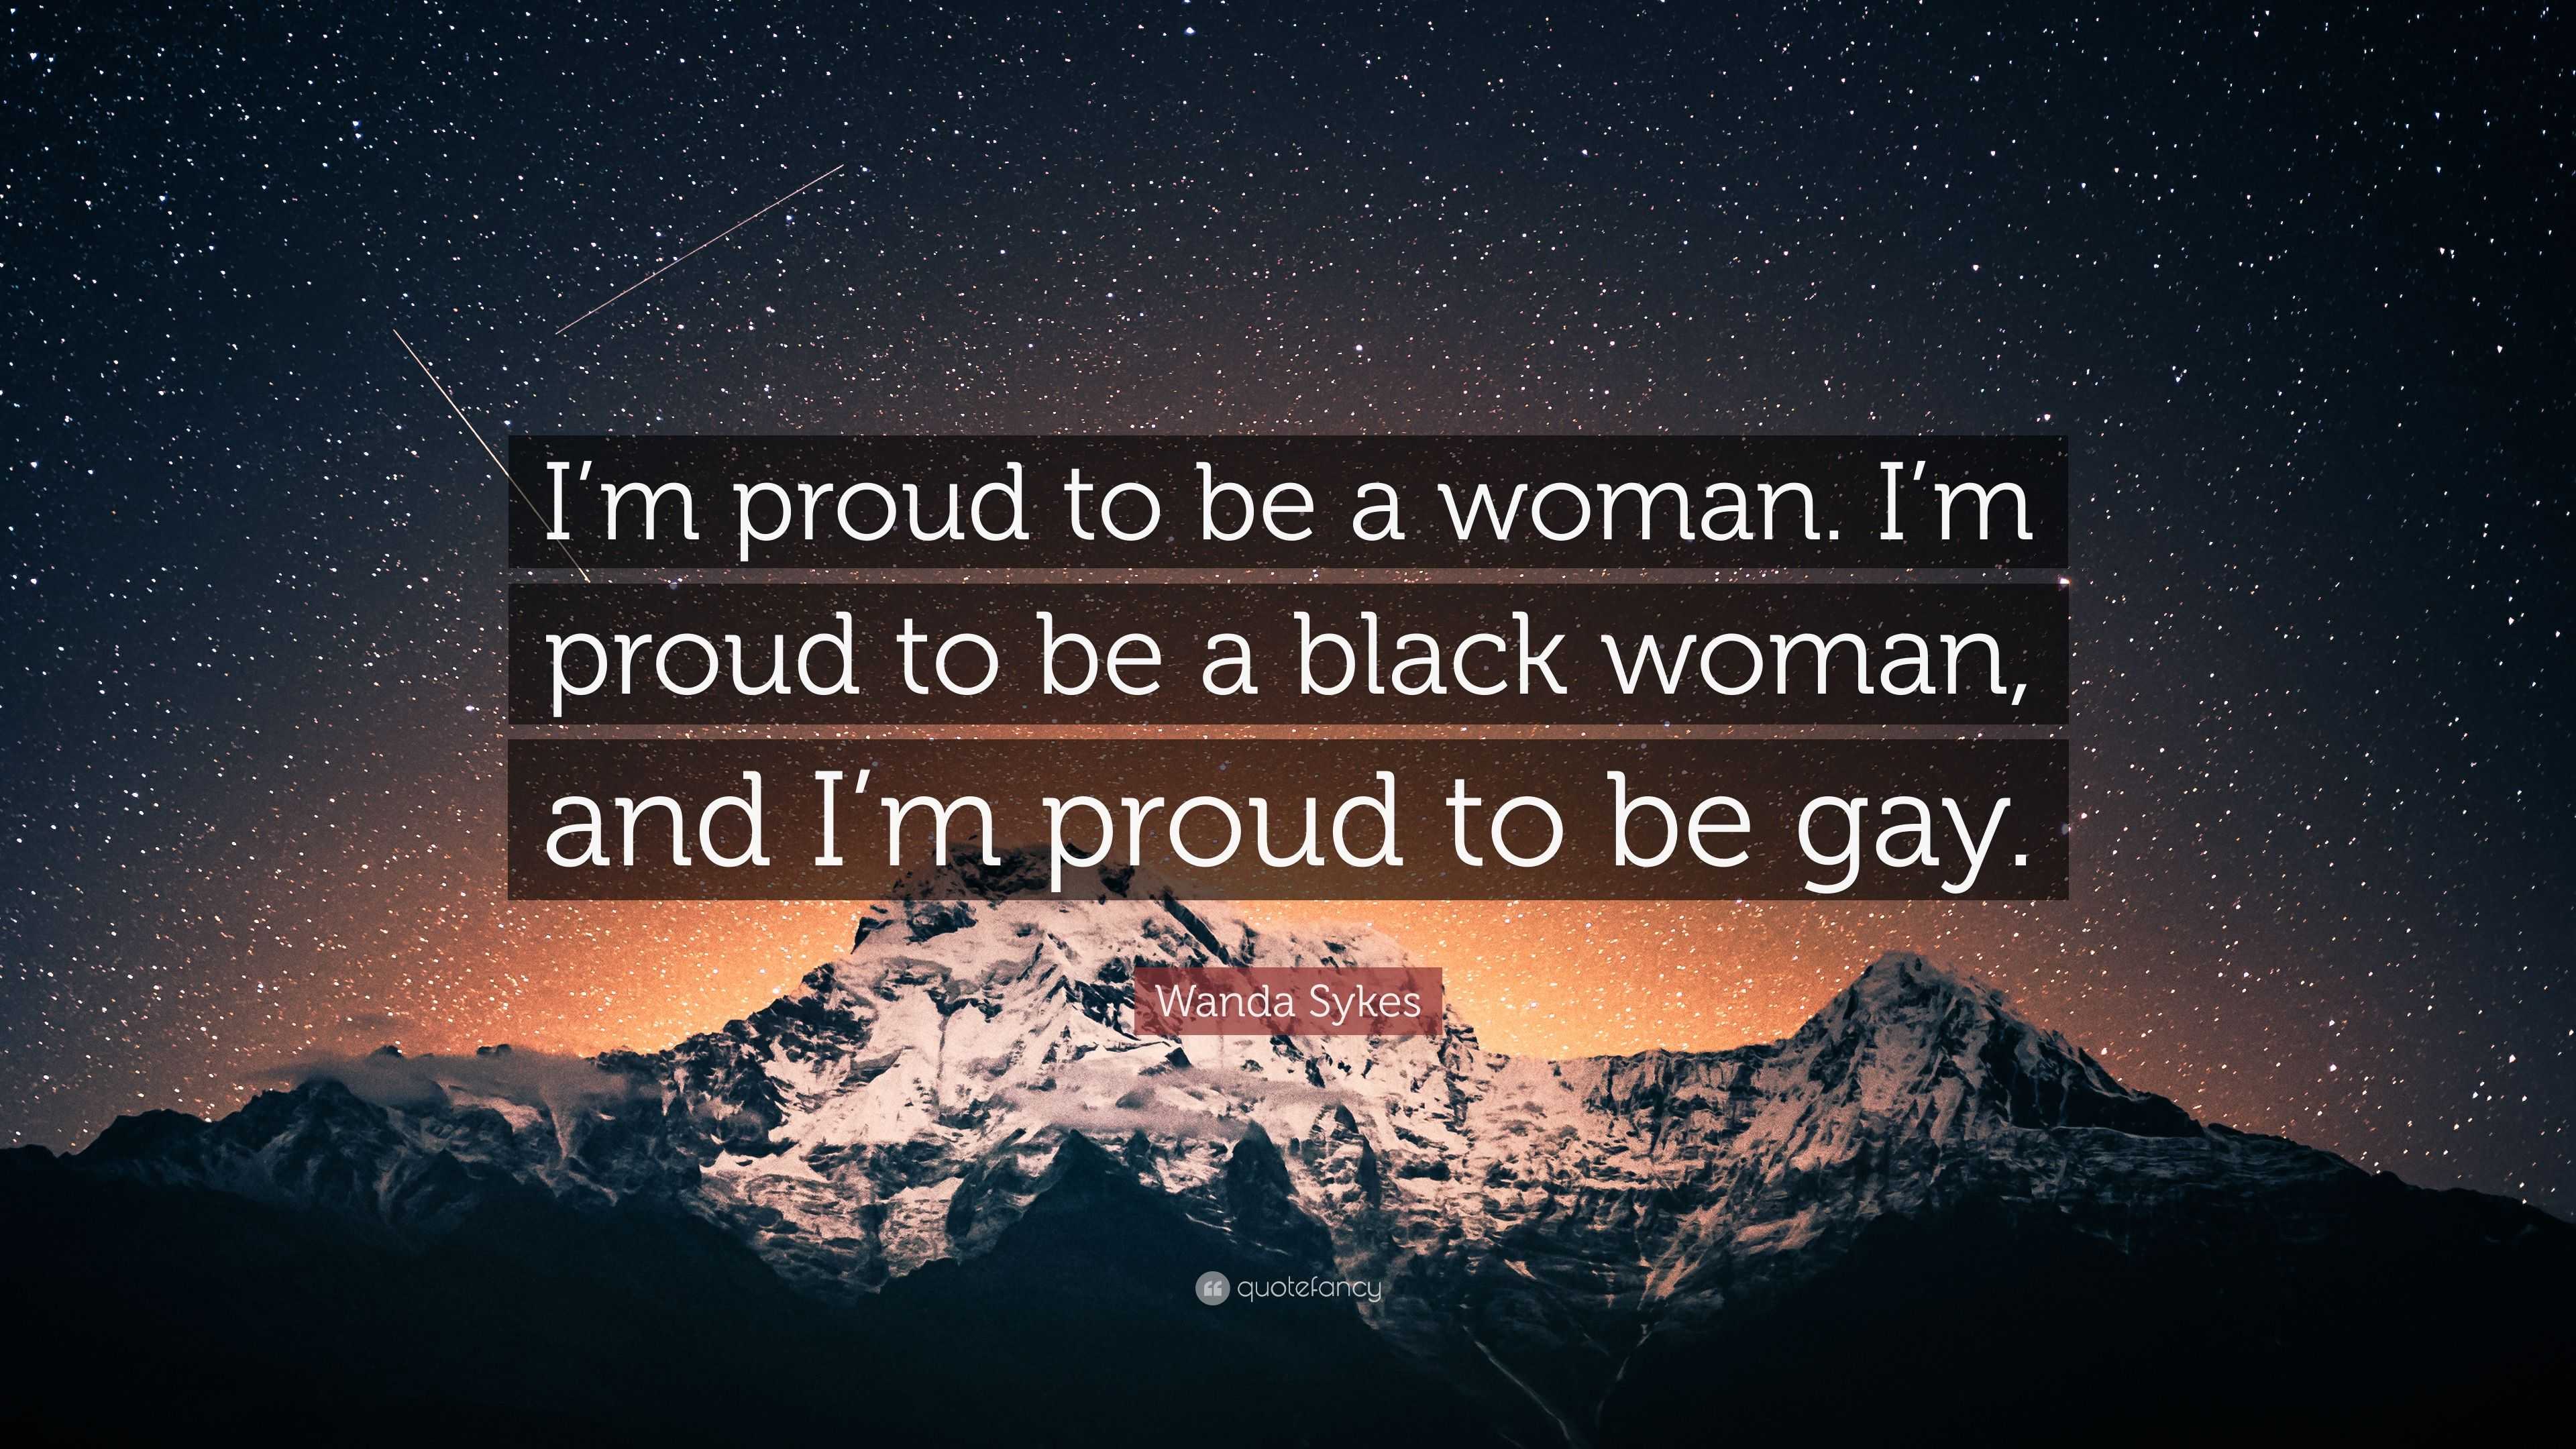 Wanda Sykes Quote “im Proud To Be A Woman Im Proud To Be A Black Woman And Im Proud To Be